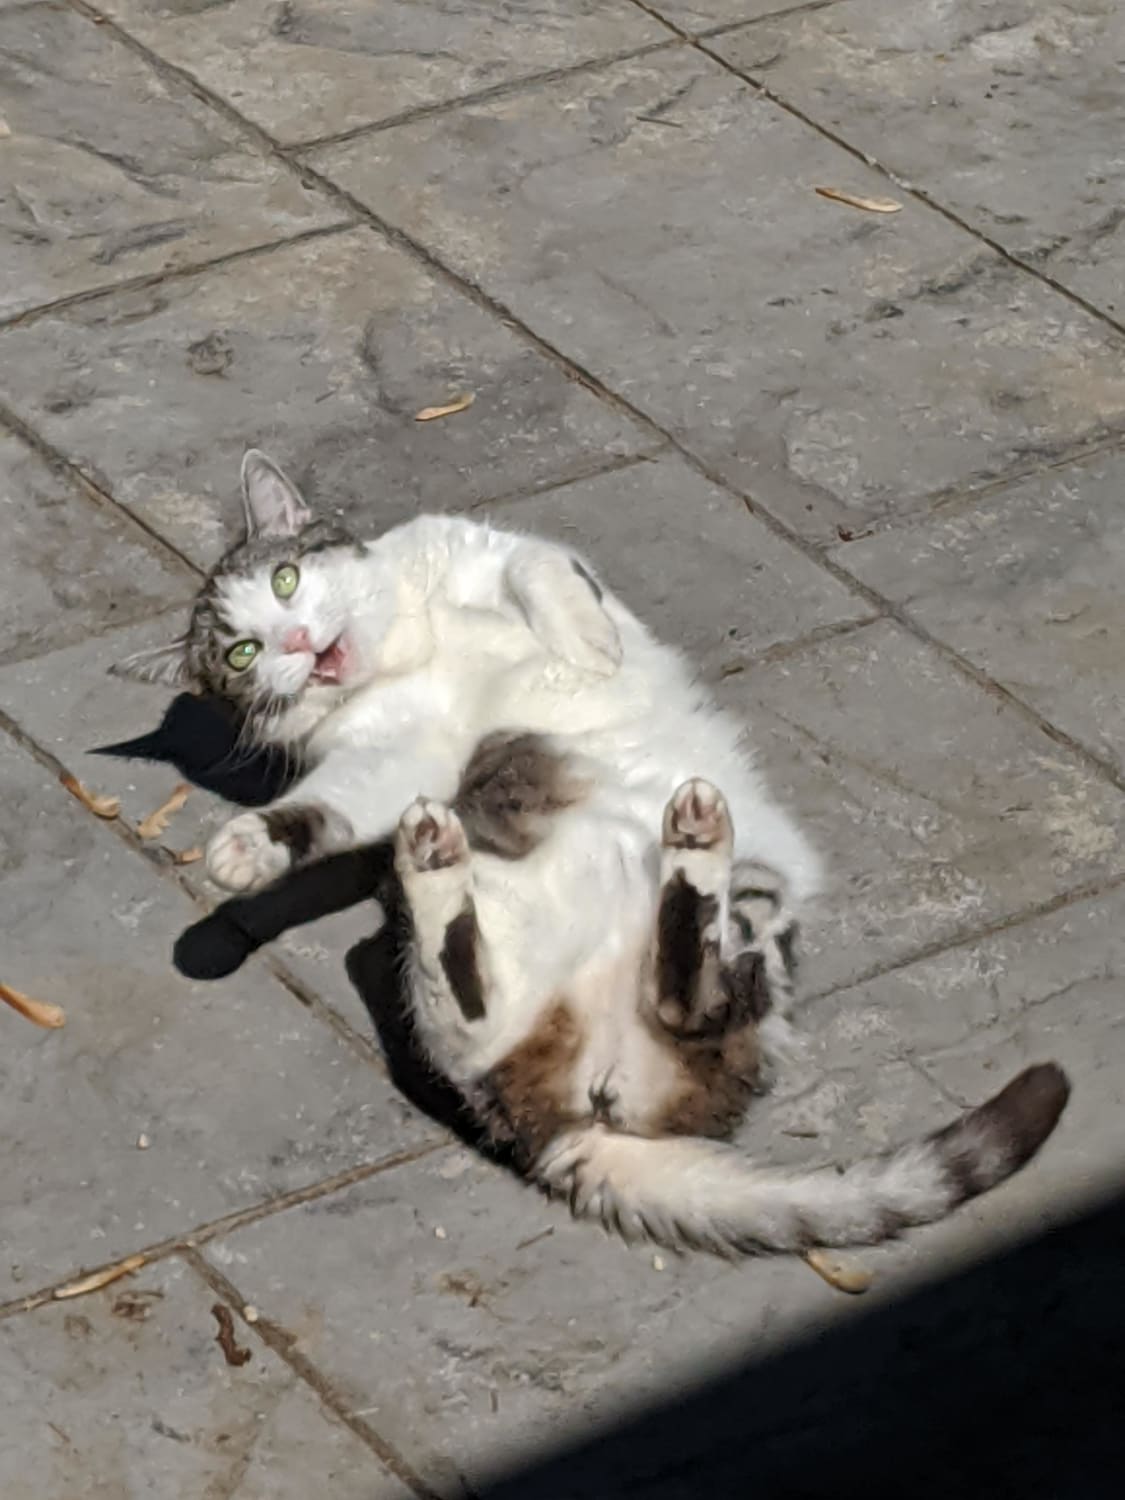 My son got the BEST pic of Emma enjoying a (supervised) roll on the patio!